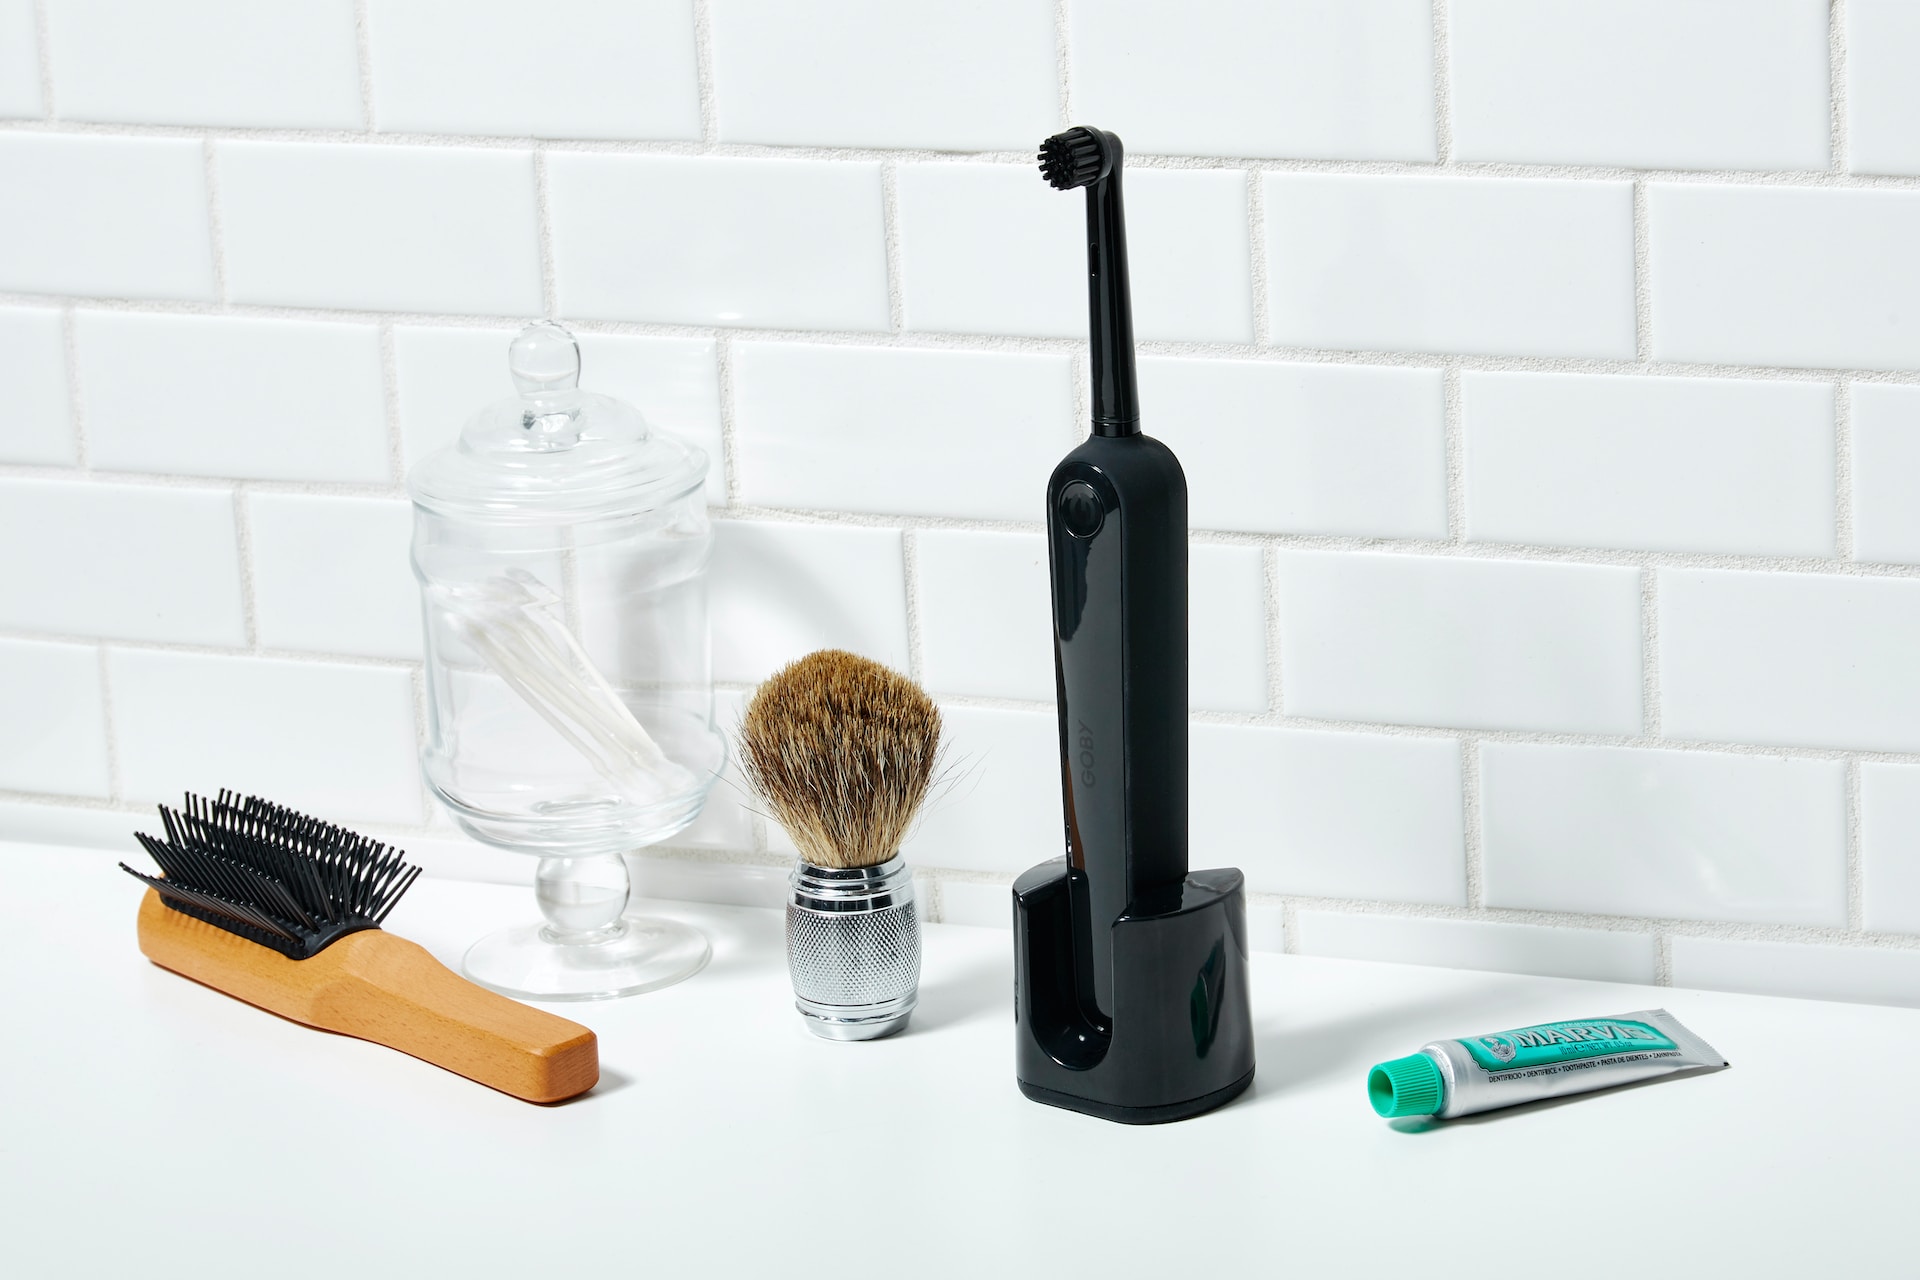 electric toothbrush and other toiletries on counter